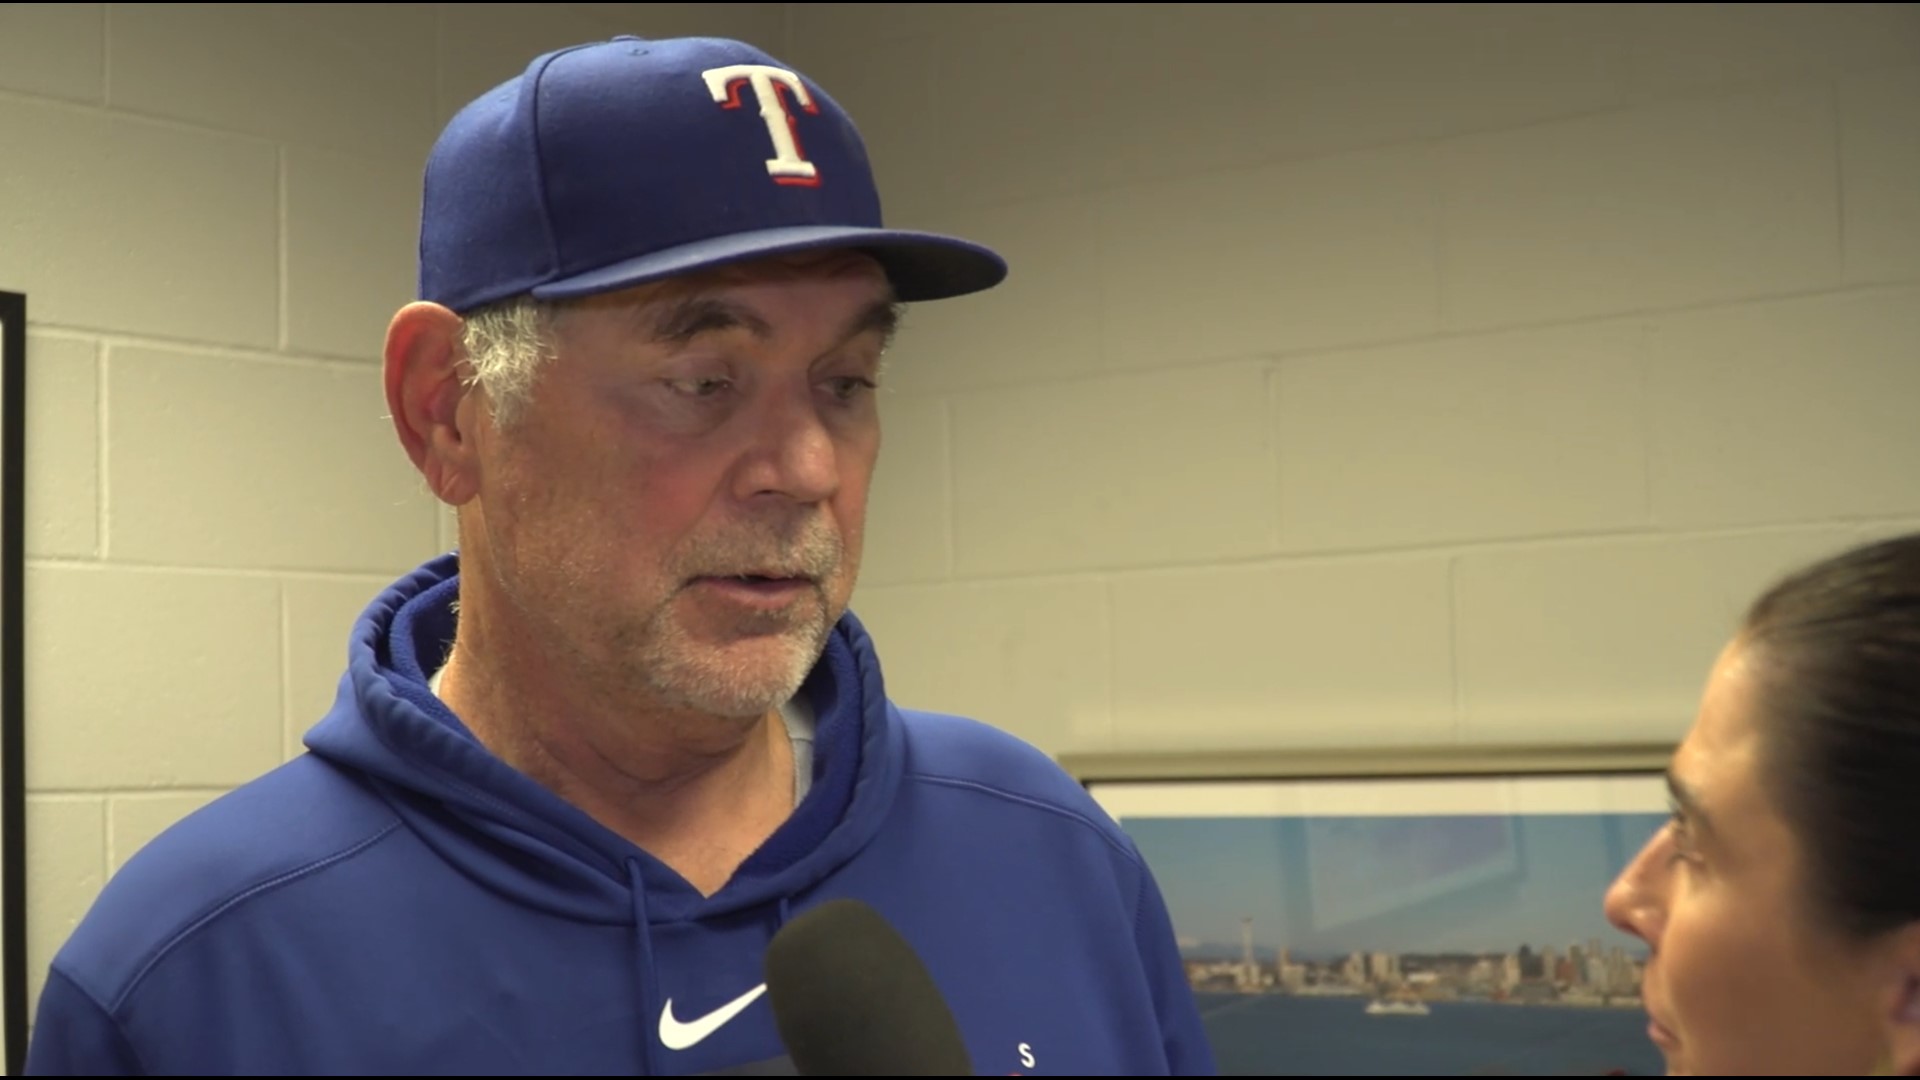 Texas Rangers manager Bruce Bochy talked with Bally Sports Southwest after the Rangers' 1-0 loss in Seattle on Sunday.